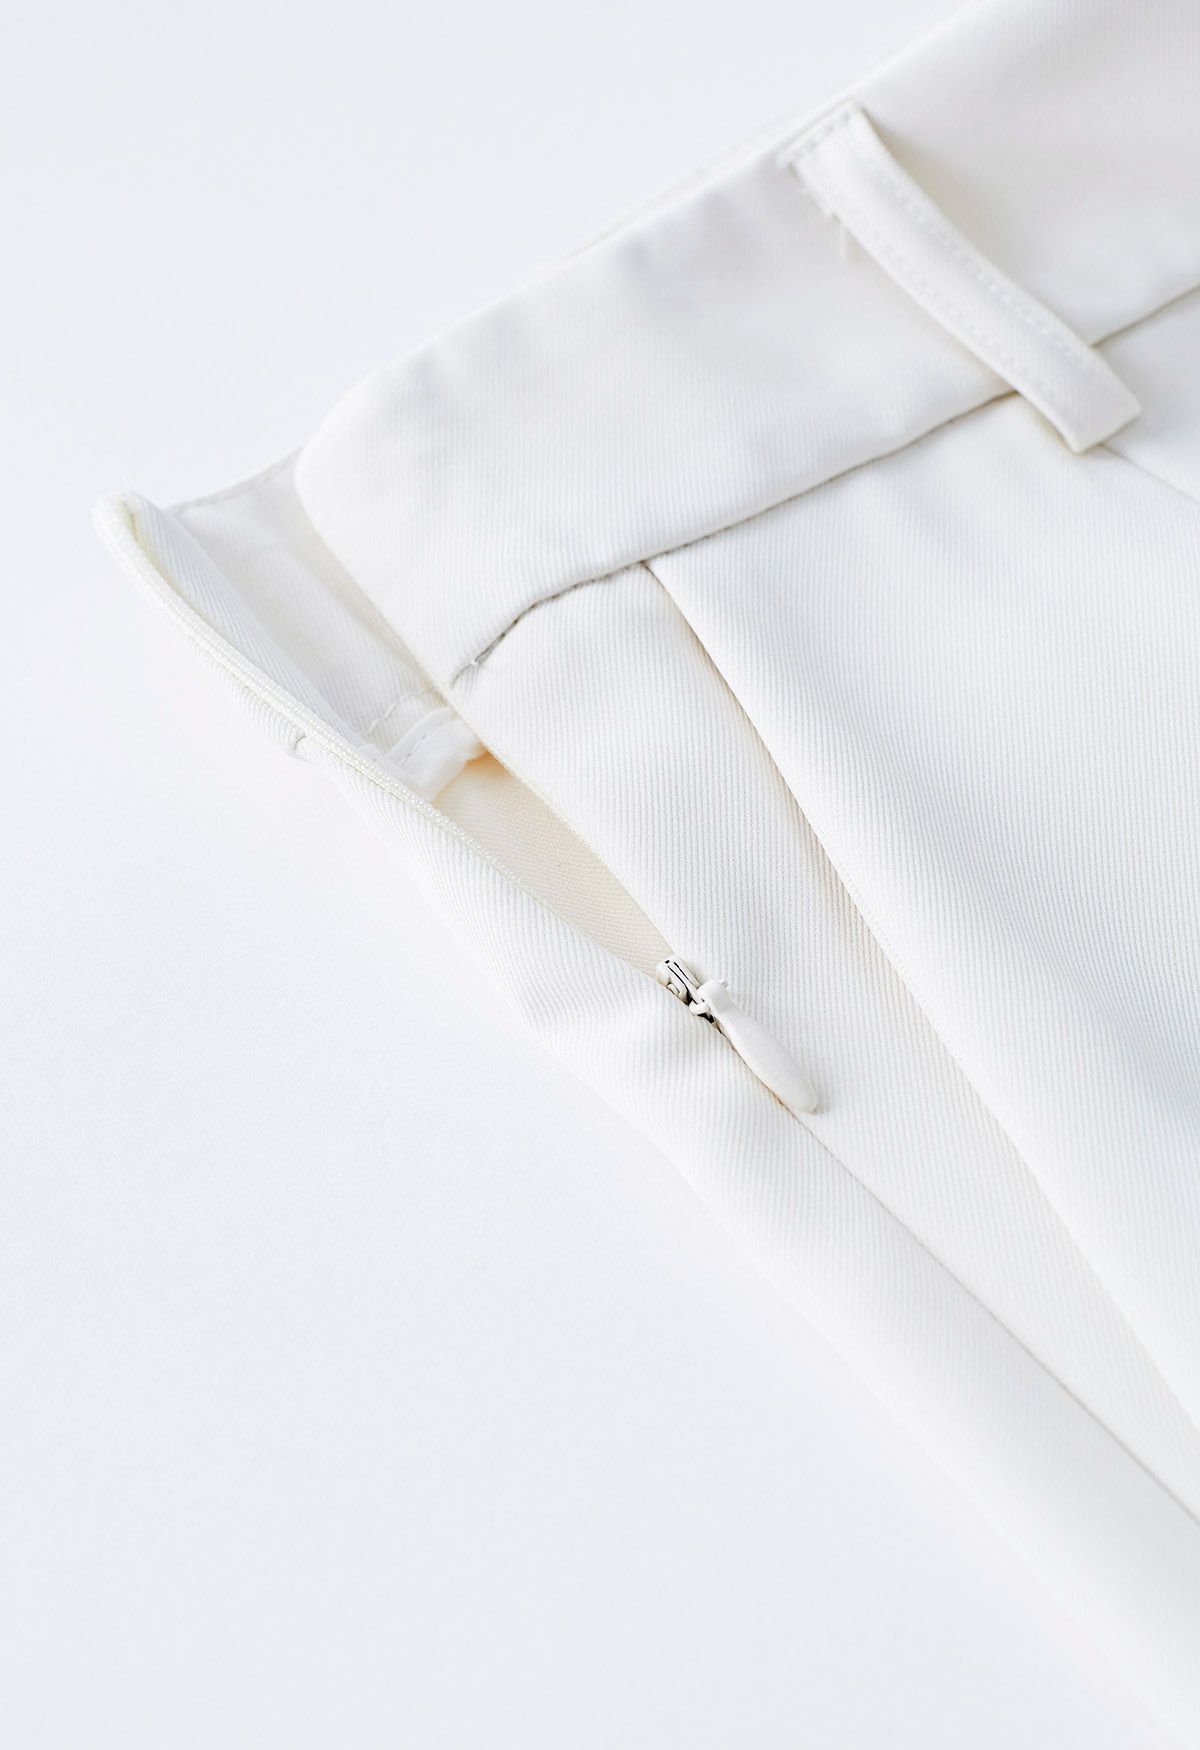 Side-Zip Belted Straight-Leg Pants in Ivory